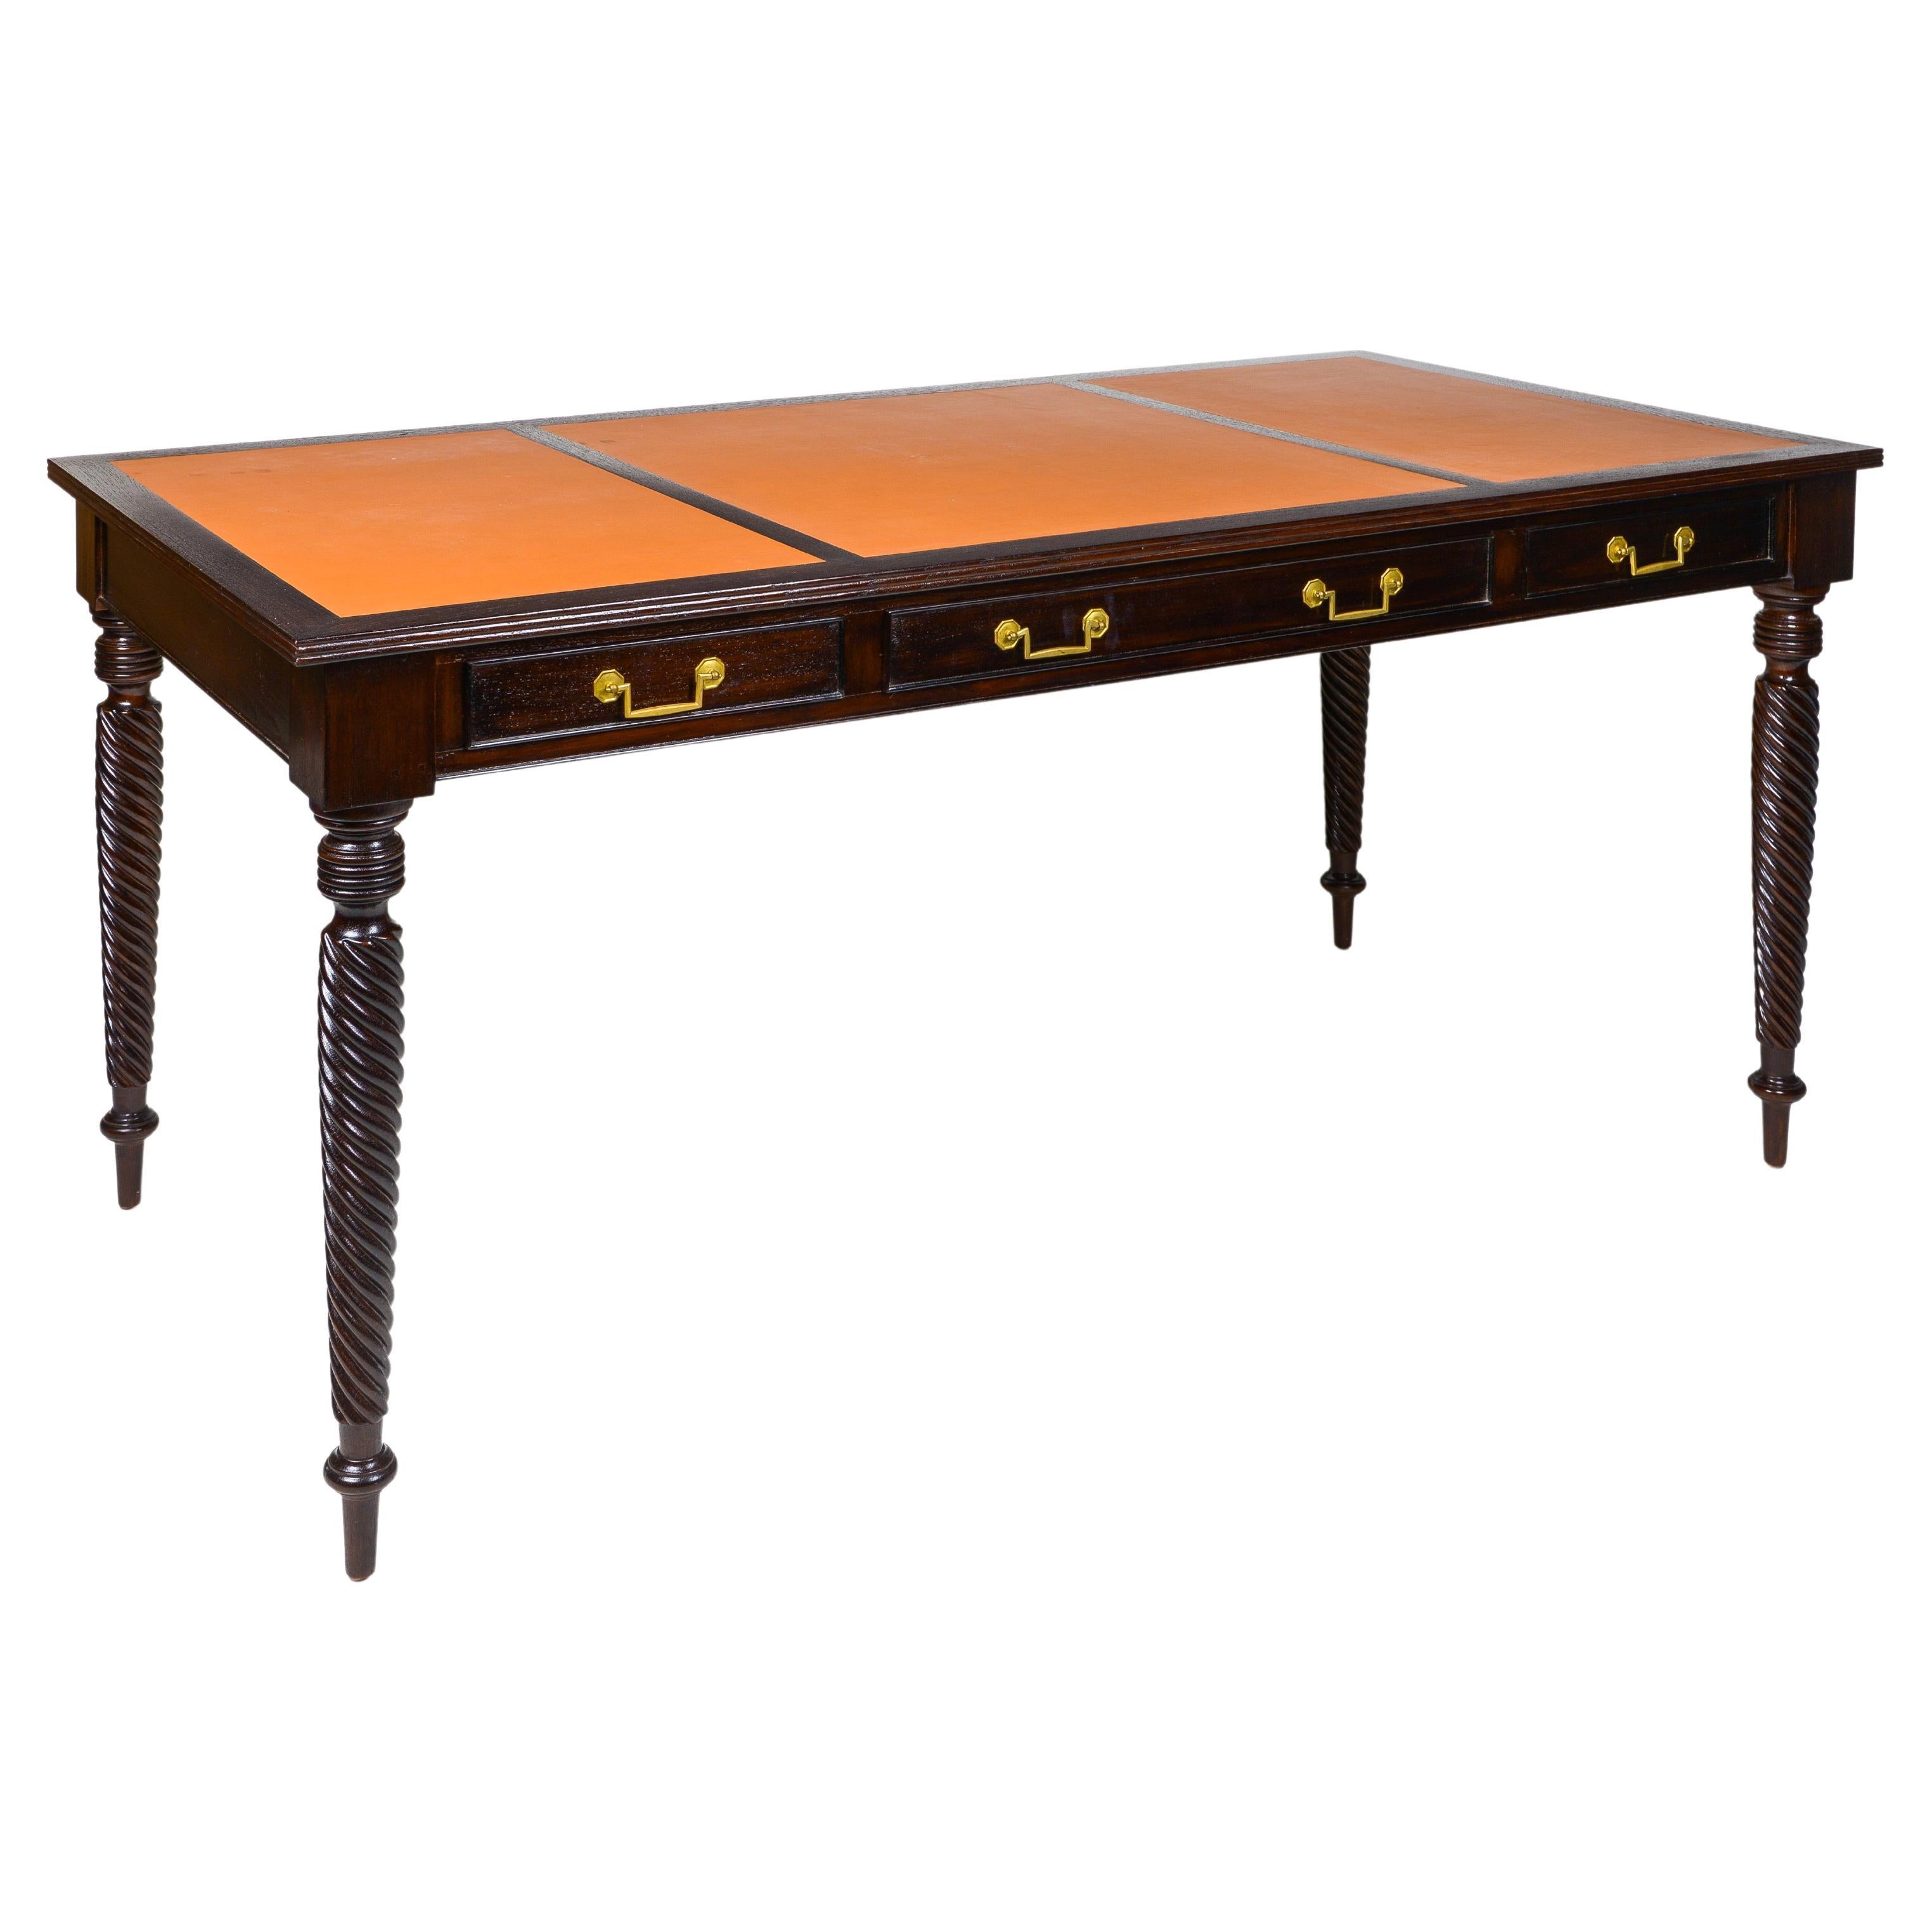 Neoclassical Style Mahogany-Stained Wood and Leather-Lined Writing Table For Sale